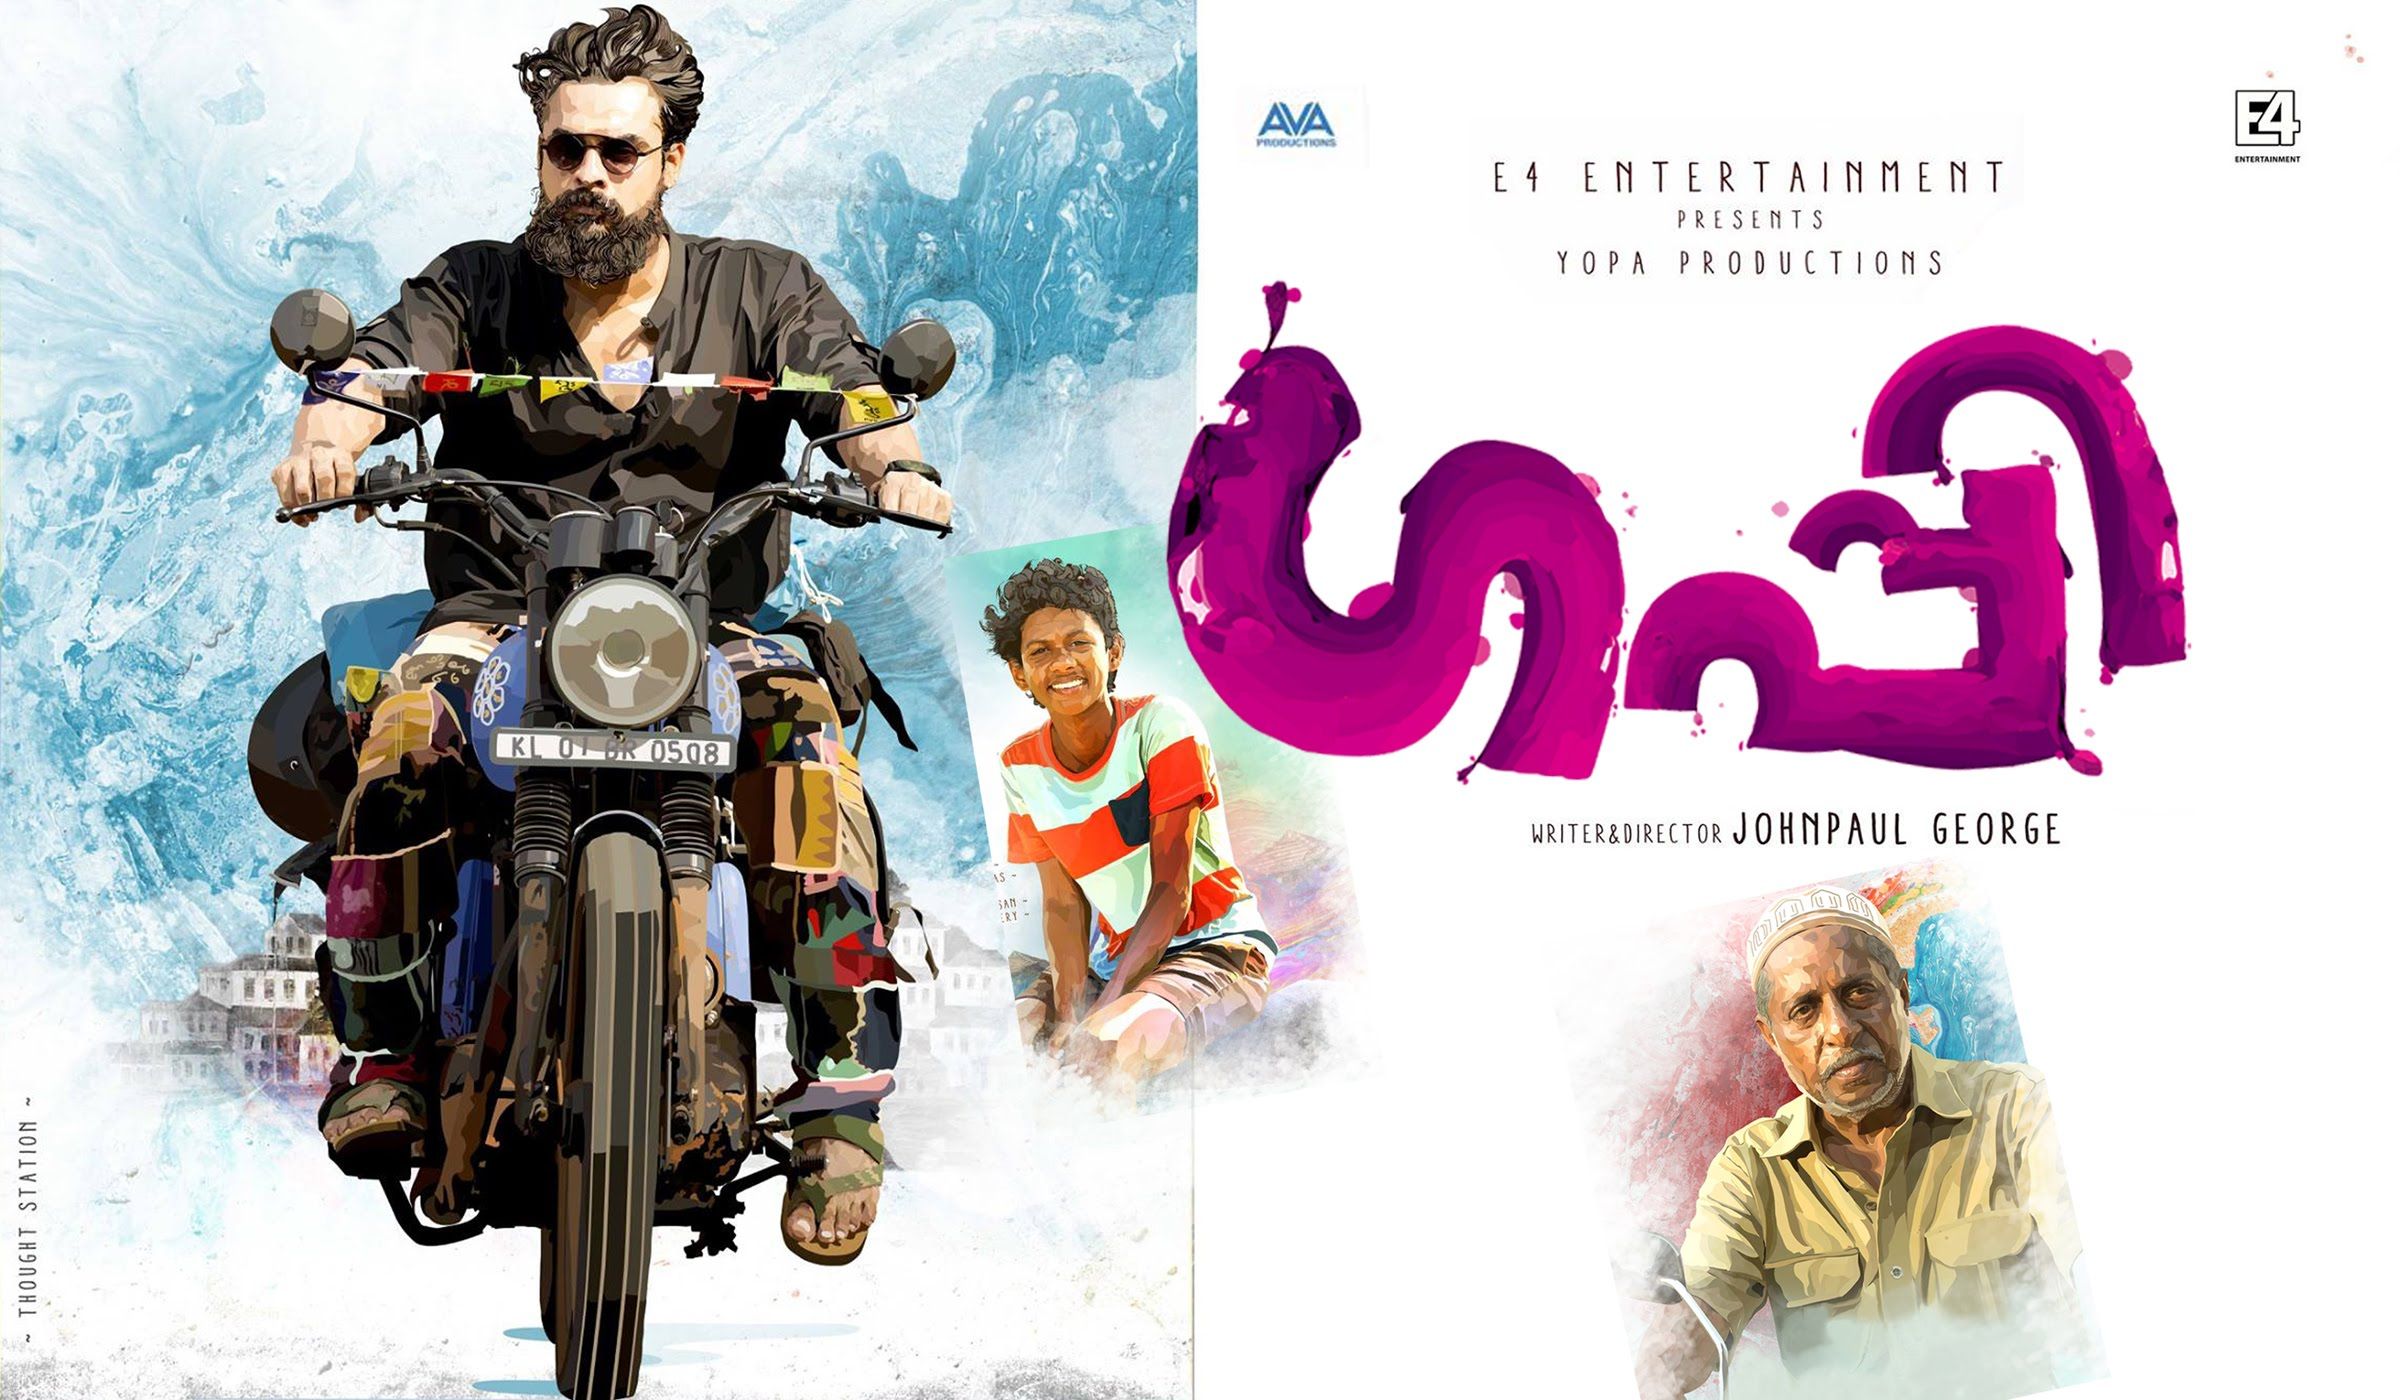 Malayalam movies that you can watch with your children